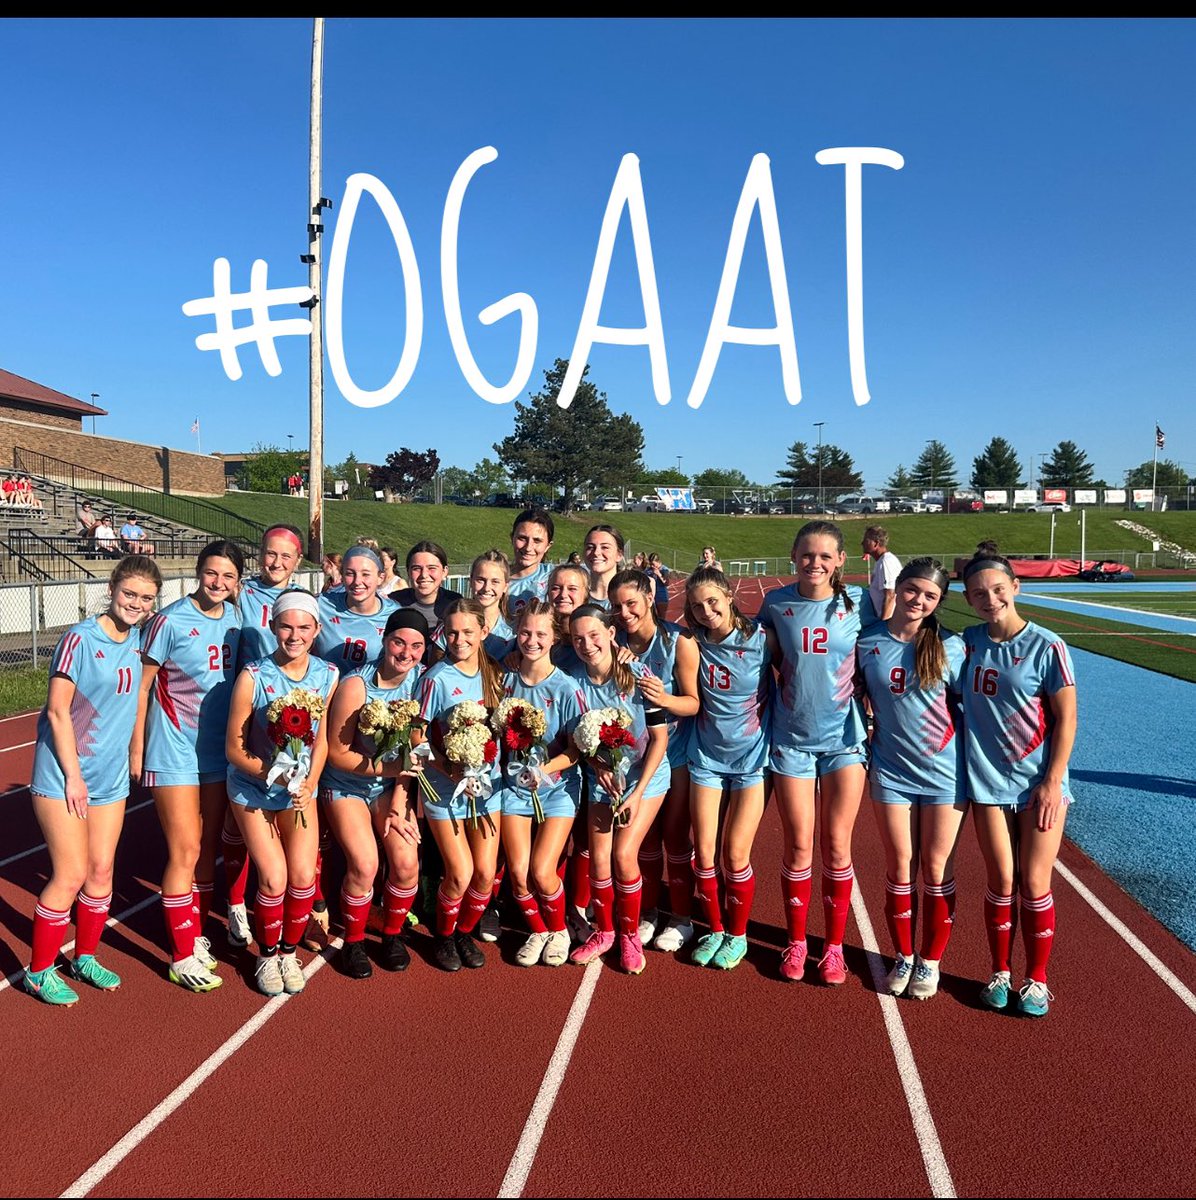 💪🏻Playoff Time!!!💪🏻 The Longhorns travel to Washington to compete against Washington in the first round of district play. Kickoff is set for 3:30pm. $6 to enter (cash only) Let’s goooooo ladies!! 👏🏻👏🏻👏🏻 #OGAAT #HornsUp 🤘🏻